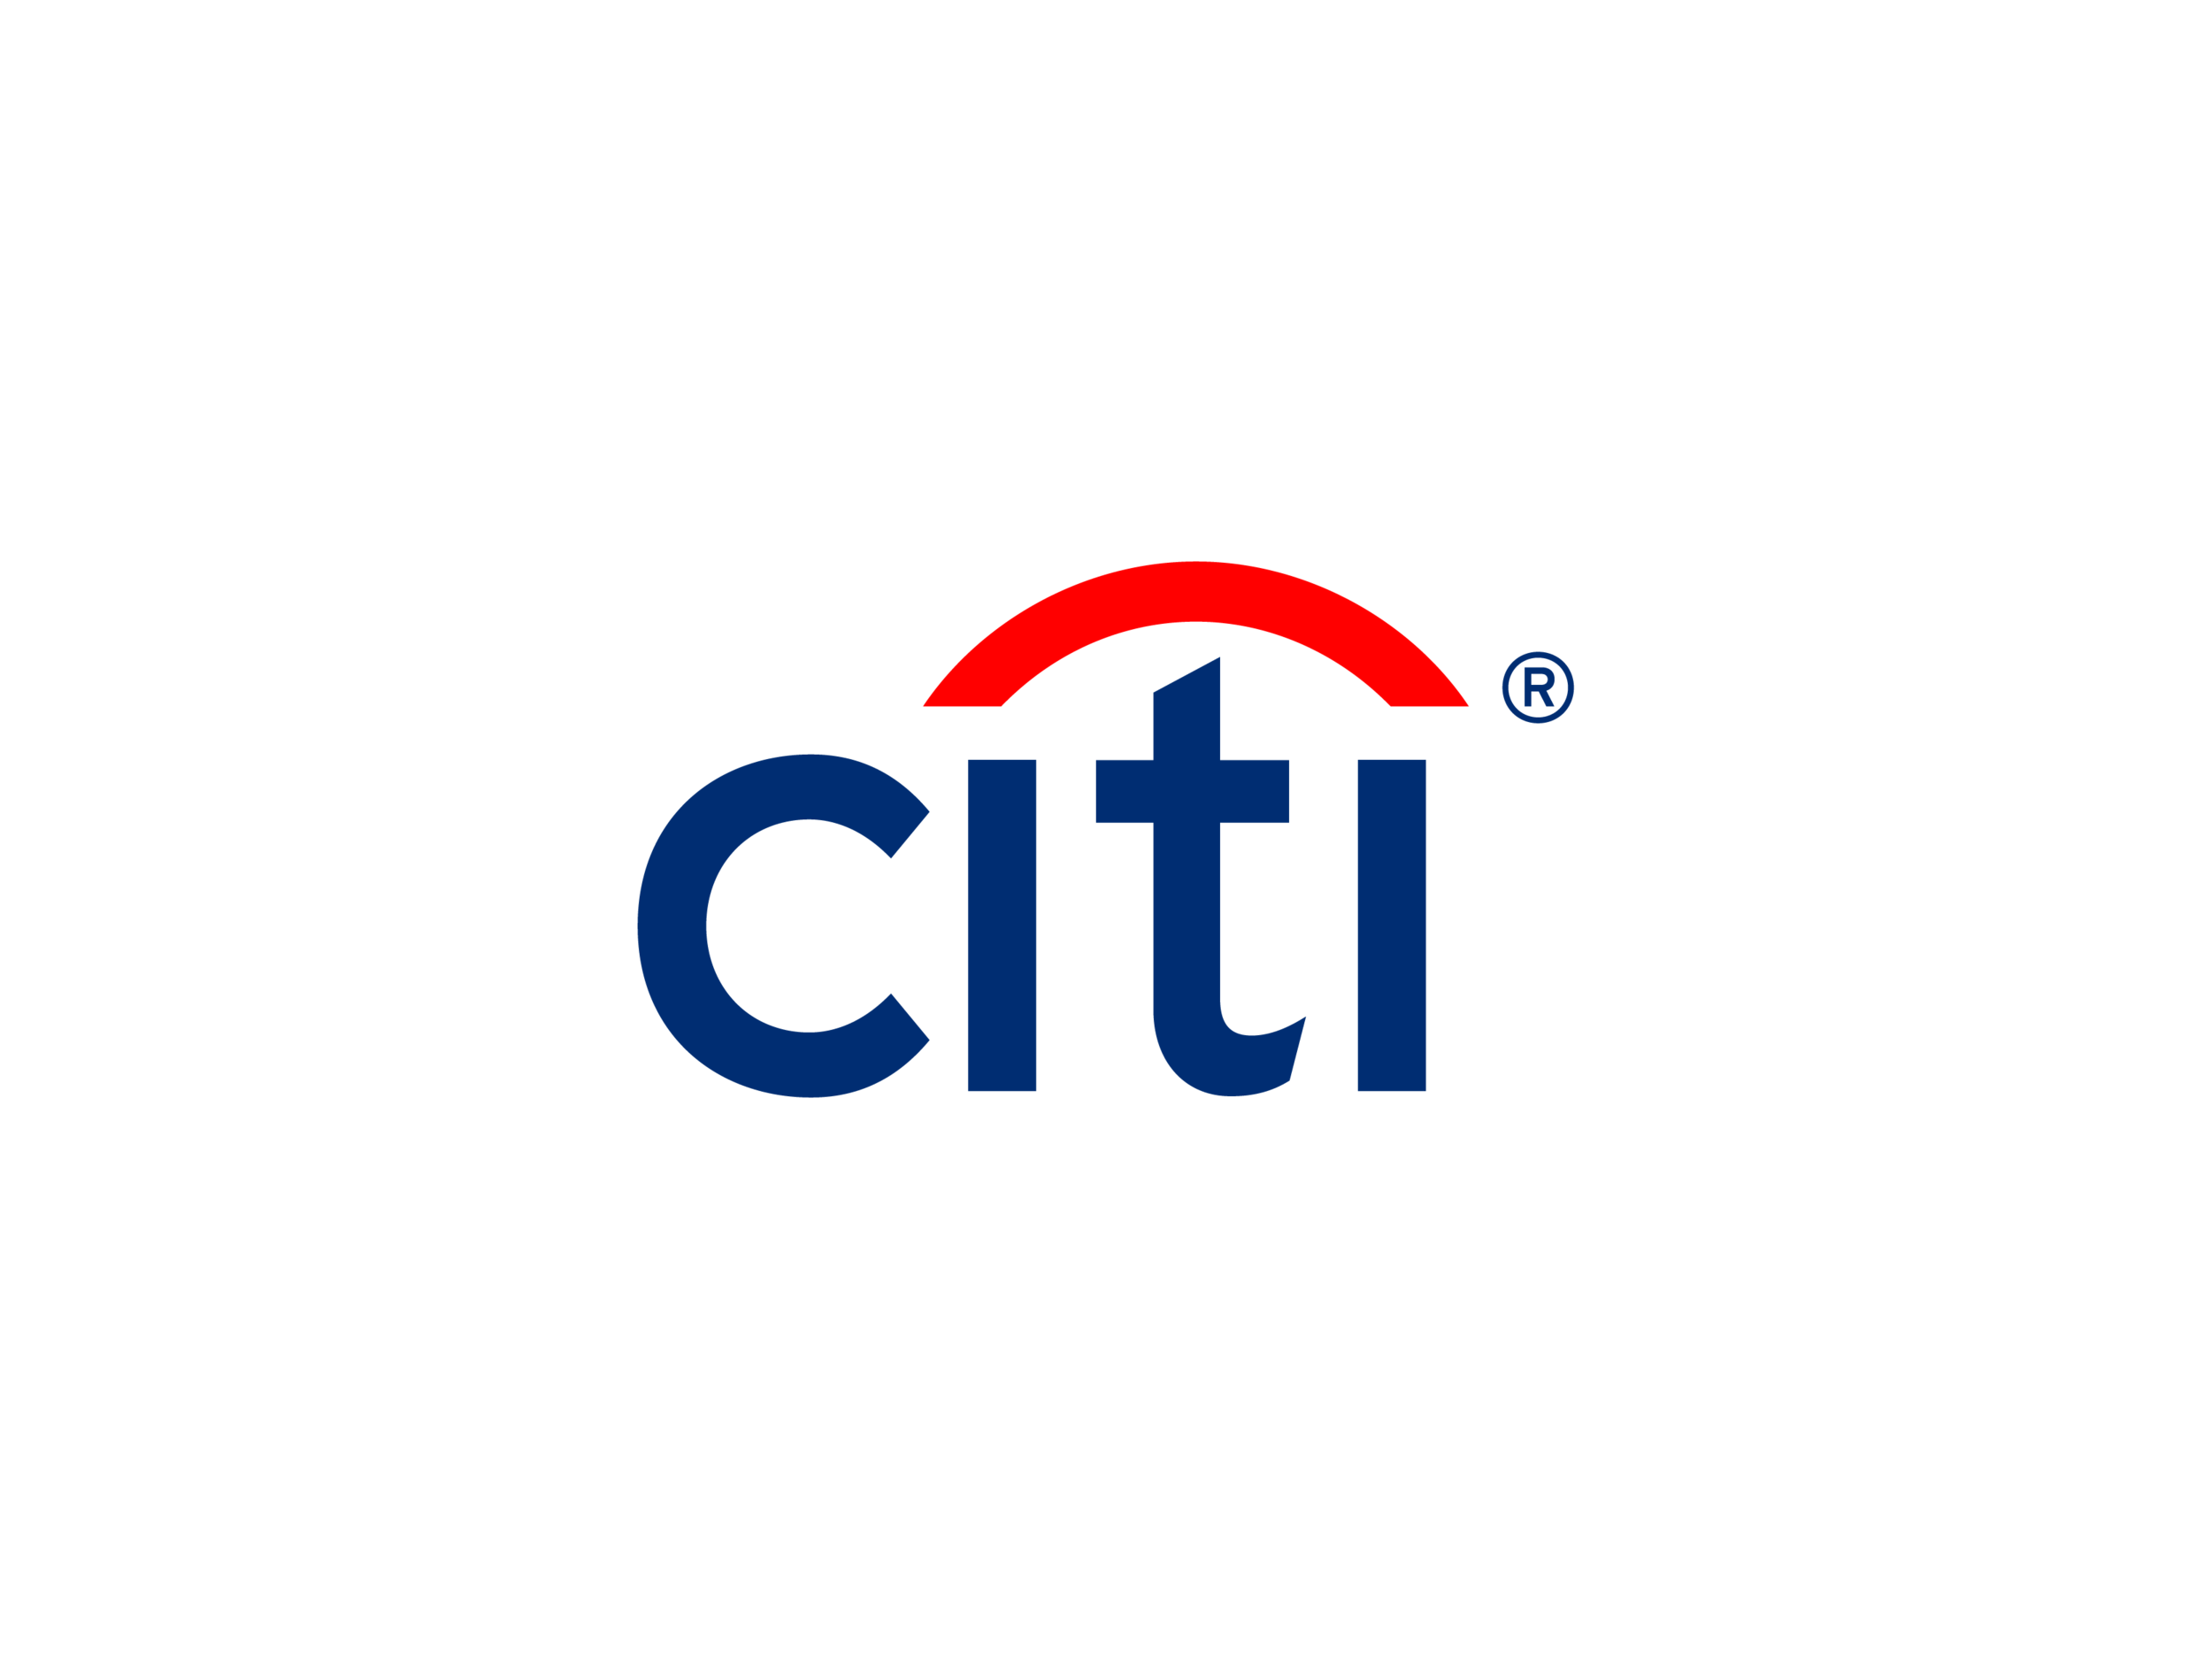 citi-750px-01.png